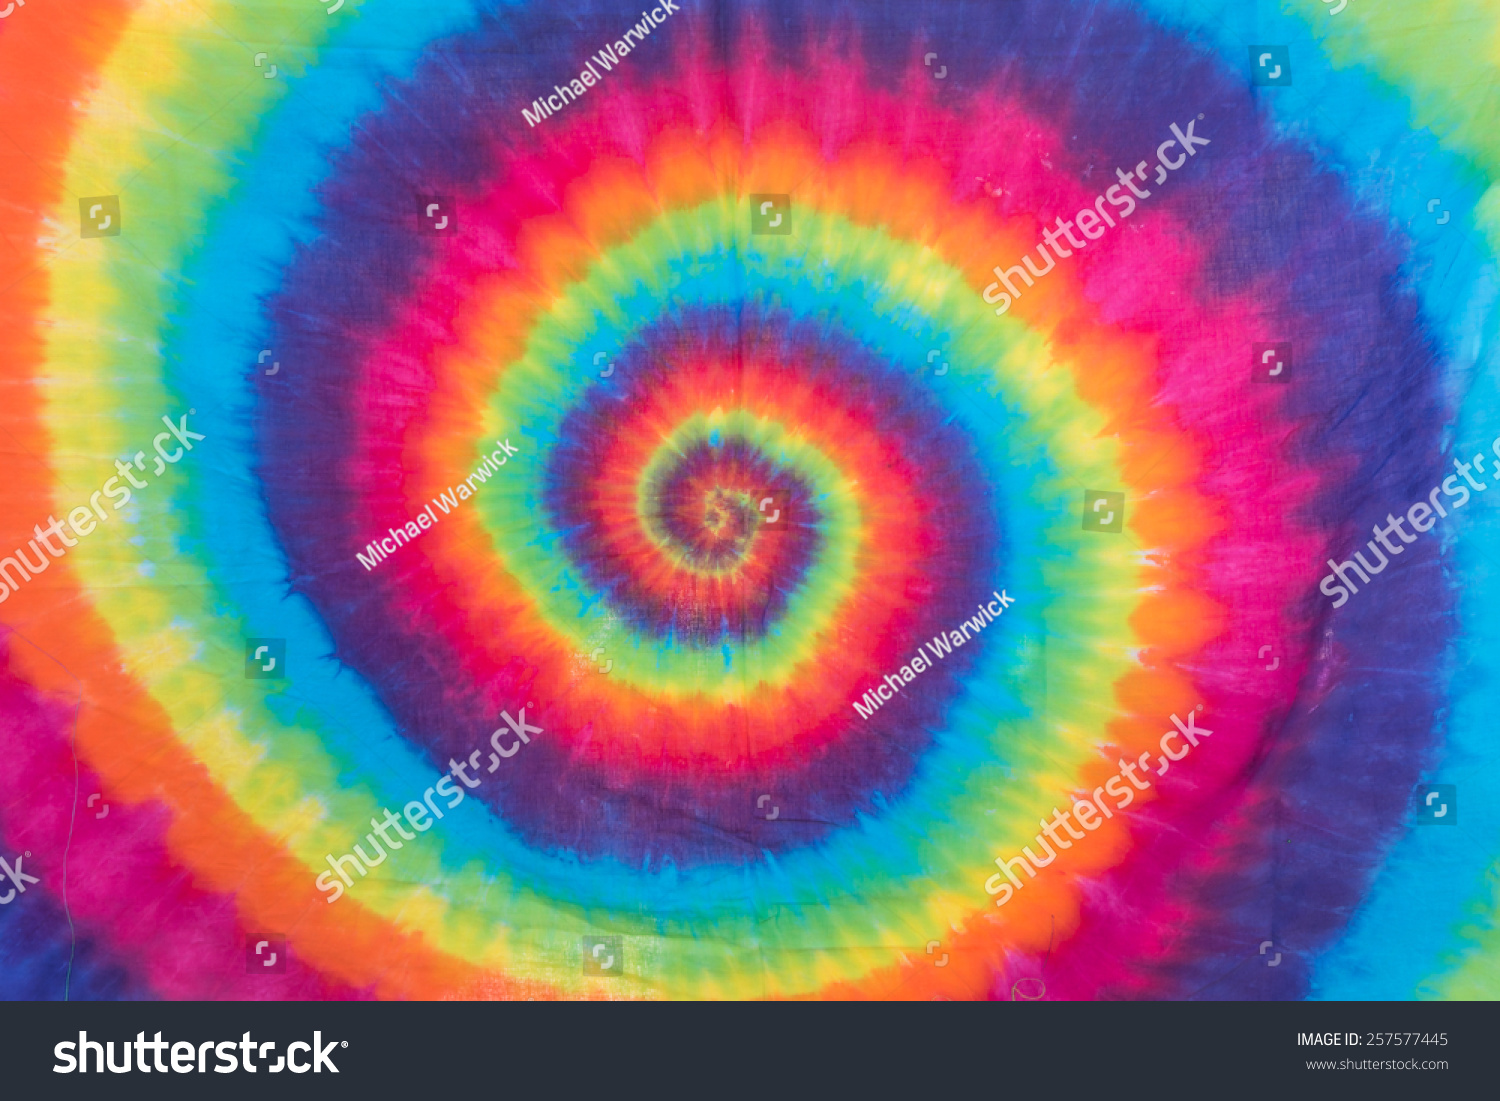 Colorful Tie Dye Swirl Design And Pattern Stock Photo 257577445 ...